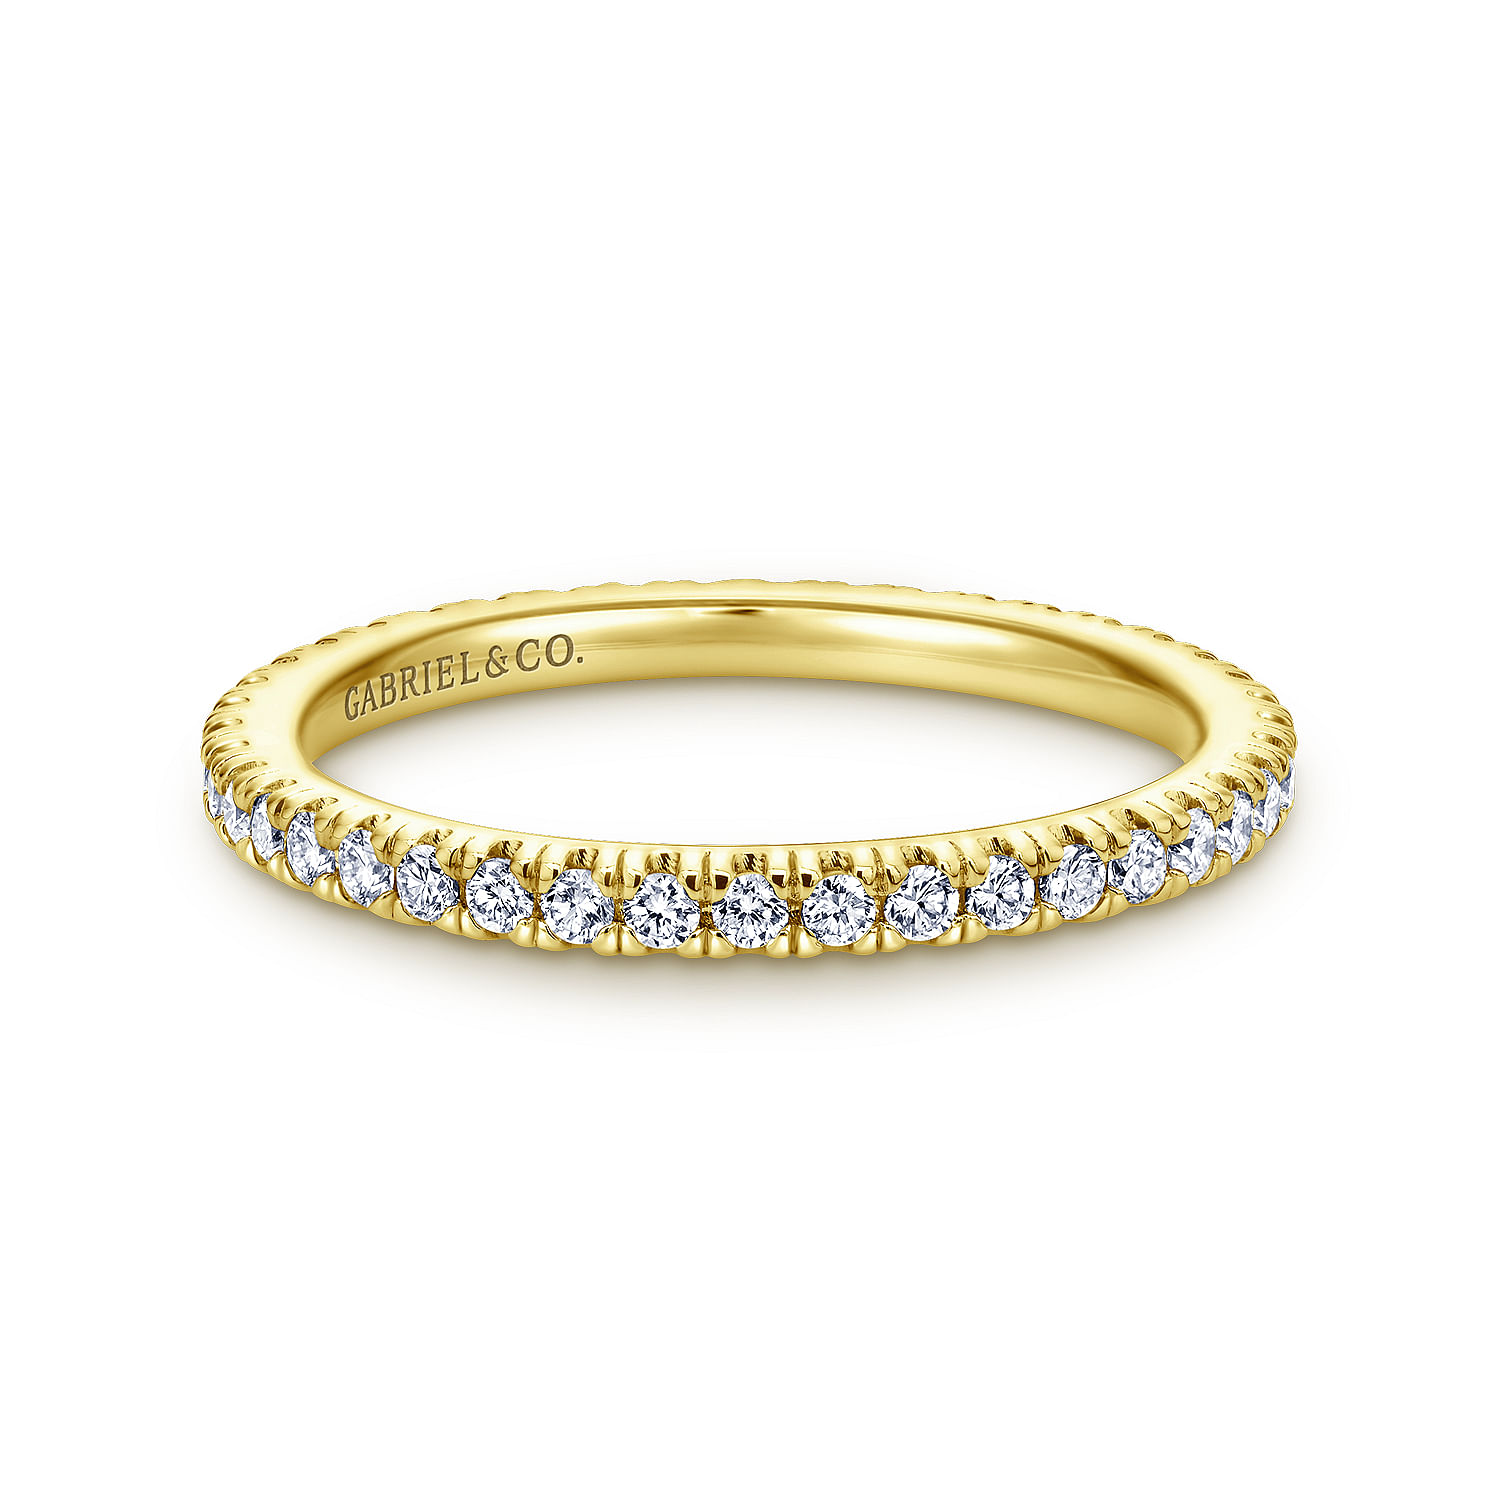 French Pave  Eternity Diamond Ring in 14K Yellow Gold